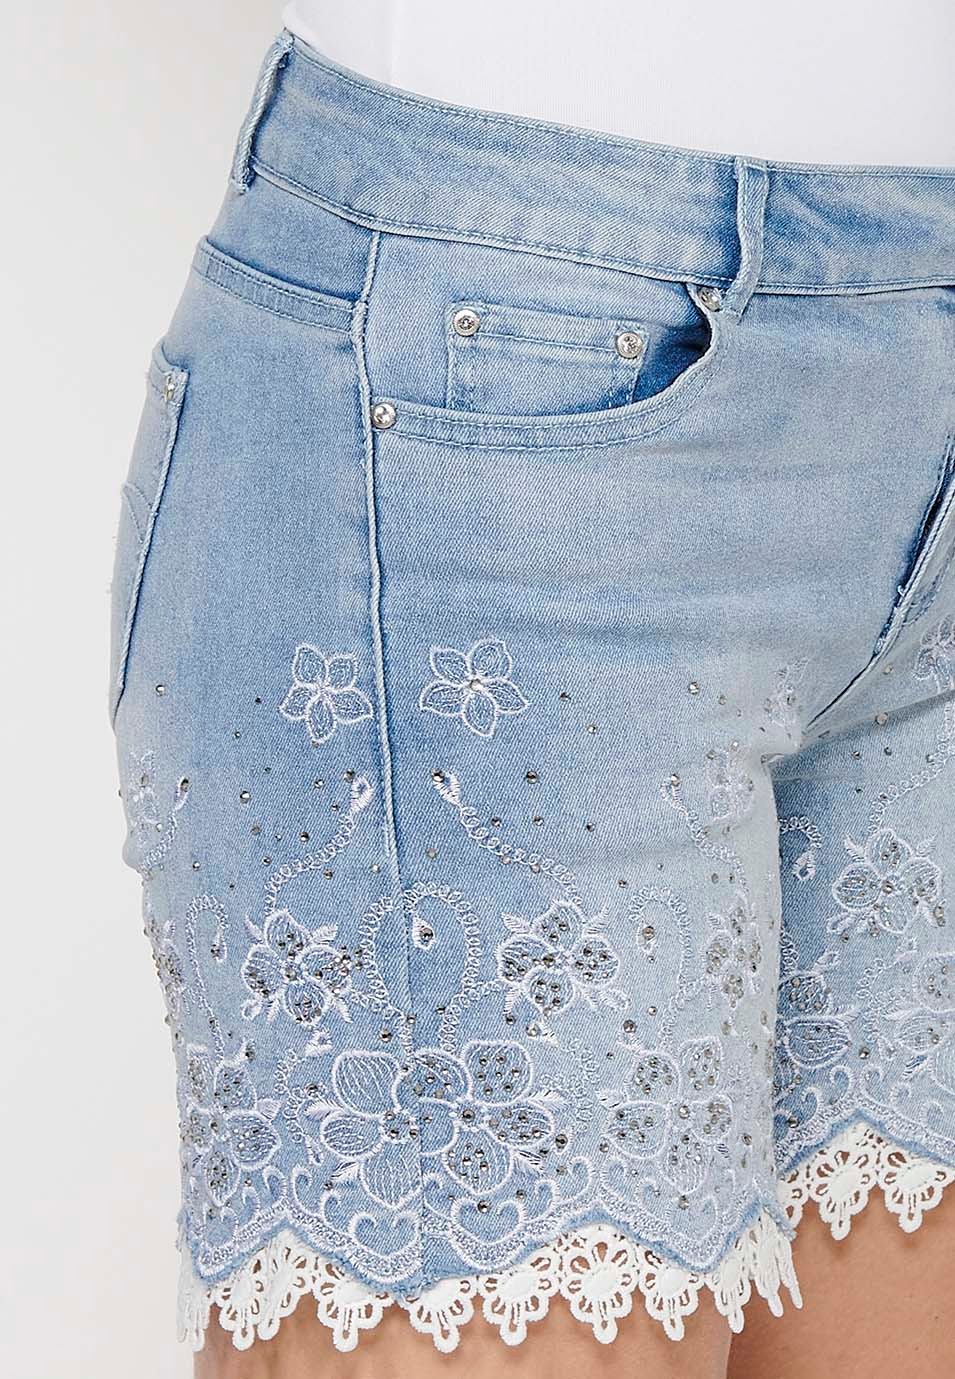 Short denim shorts finished with lace and floral embroidery with front closure with zipper and button with removable bow detail in Blue for Women 10